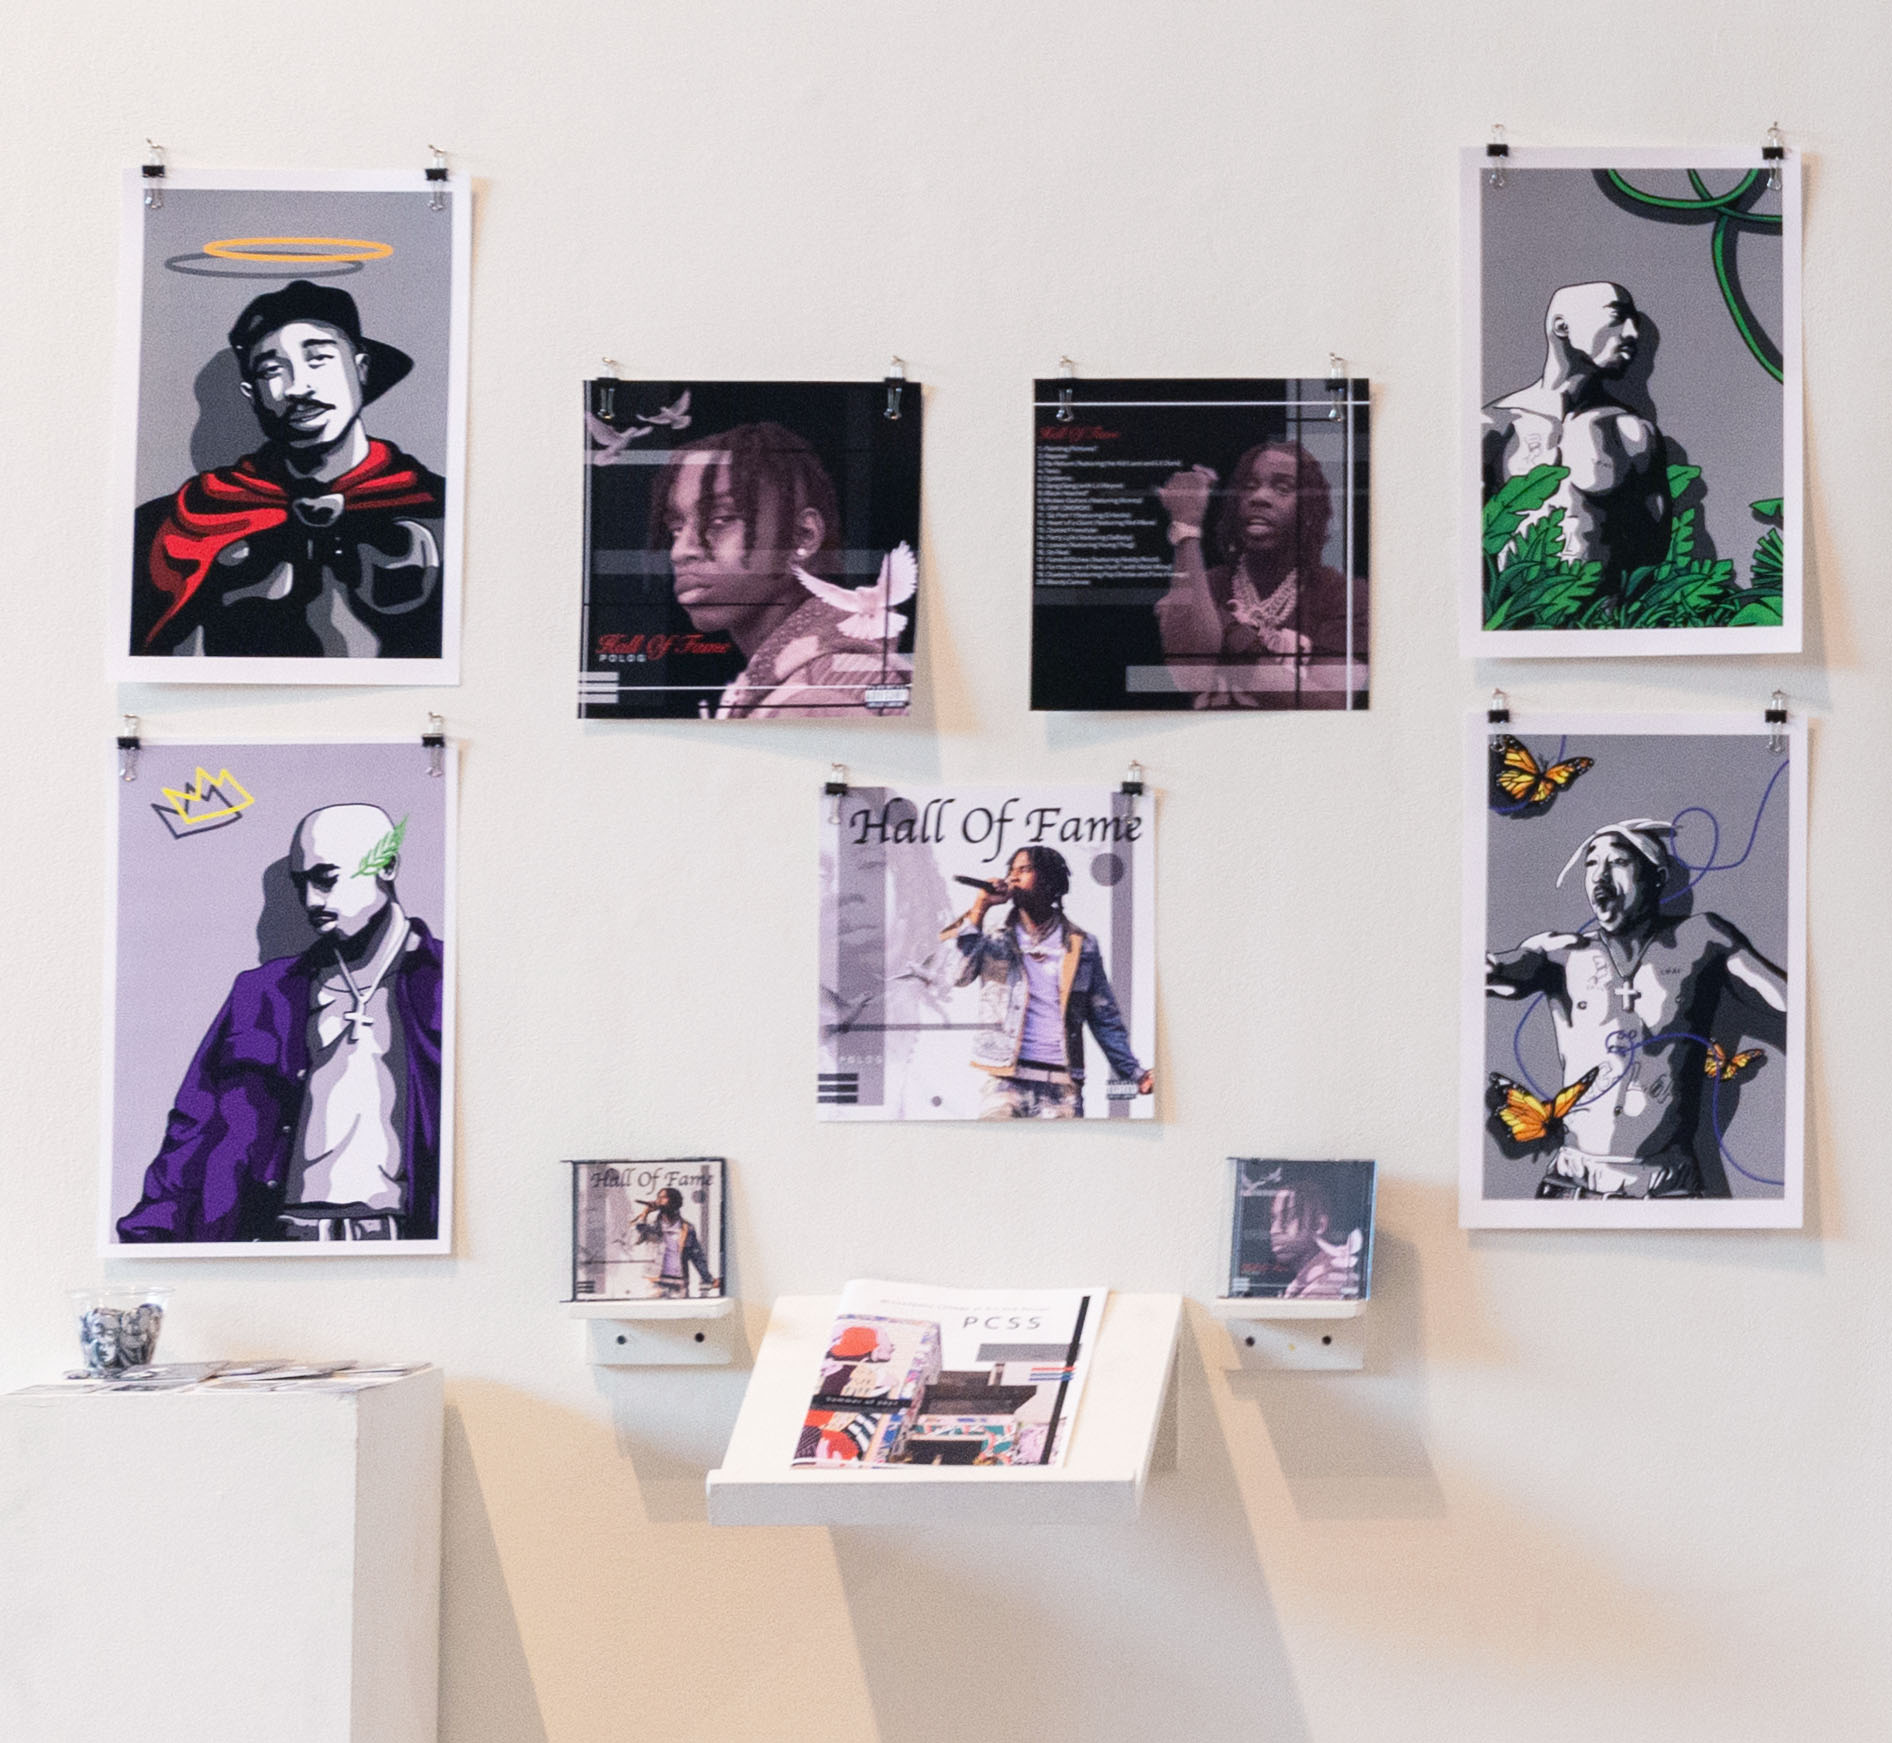 Graphic design student work featuring multiple images on a white wall. Rapper Tupac is featured in several images.